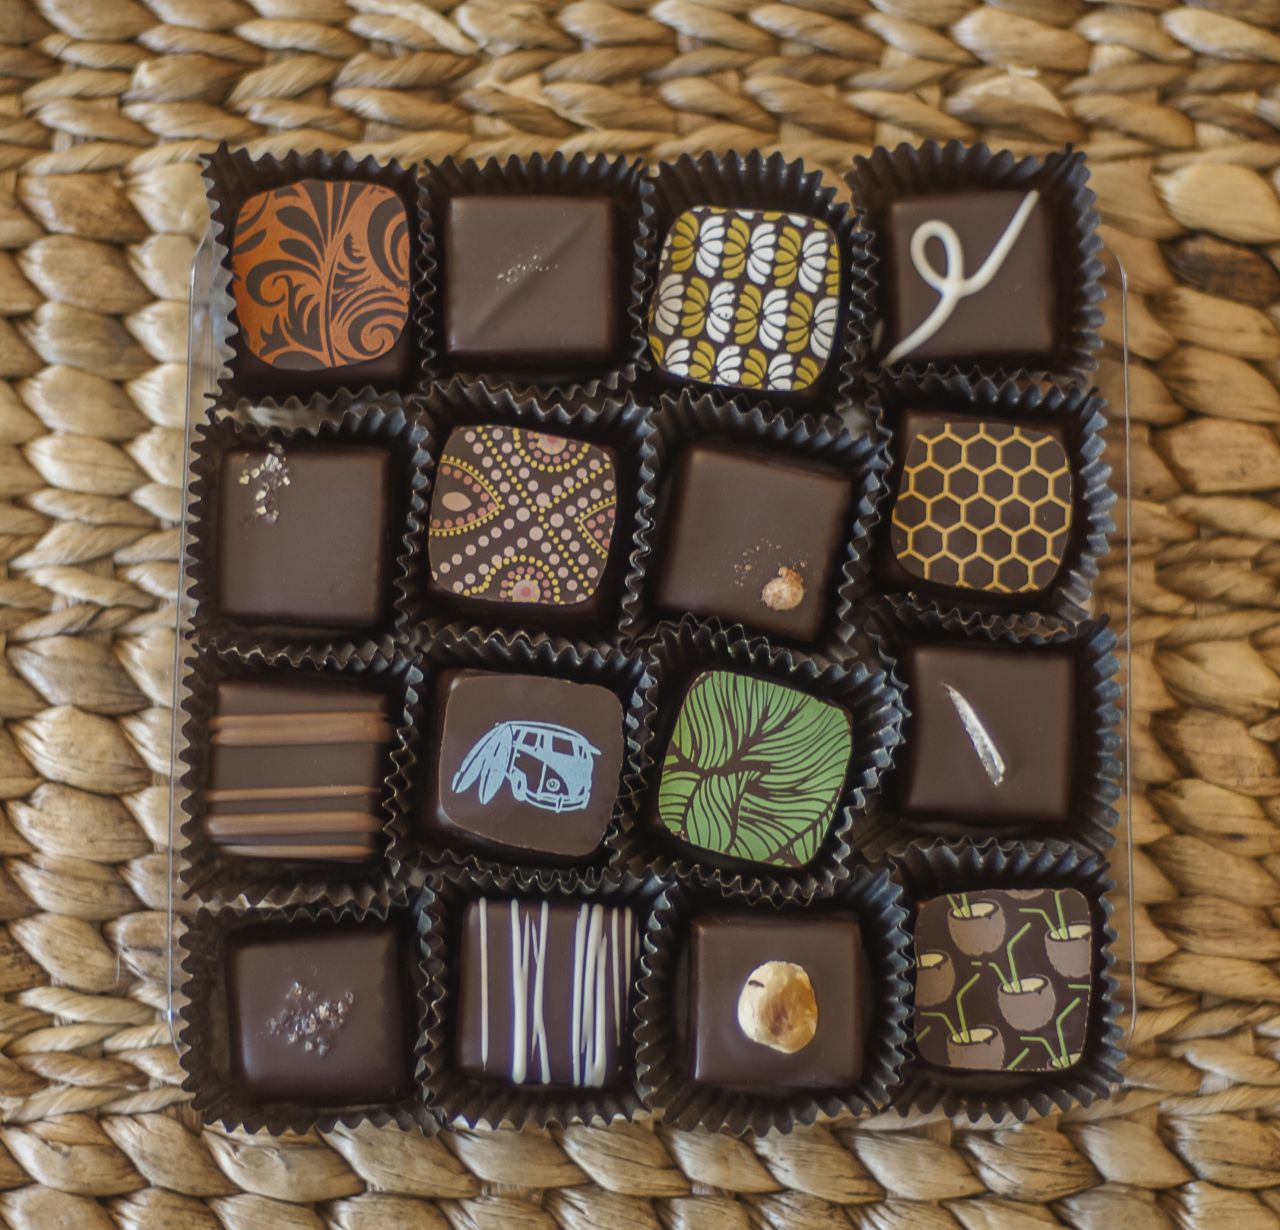 A true small-batch, bean-to-bar chocolatier, Chequessett Chocolate sells its headliner sweets alongside coffee and pastries in its shop in North Truro.